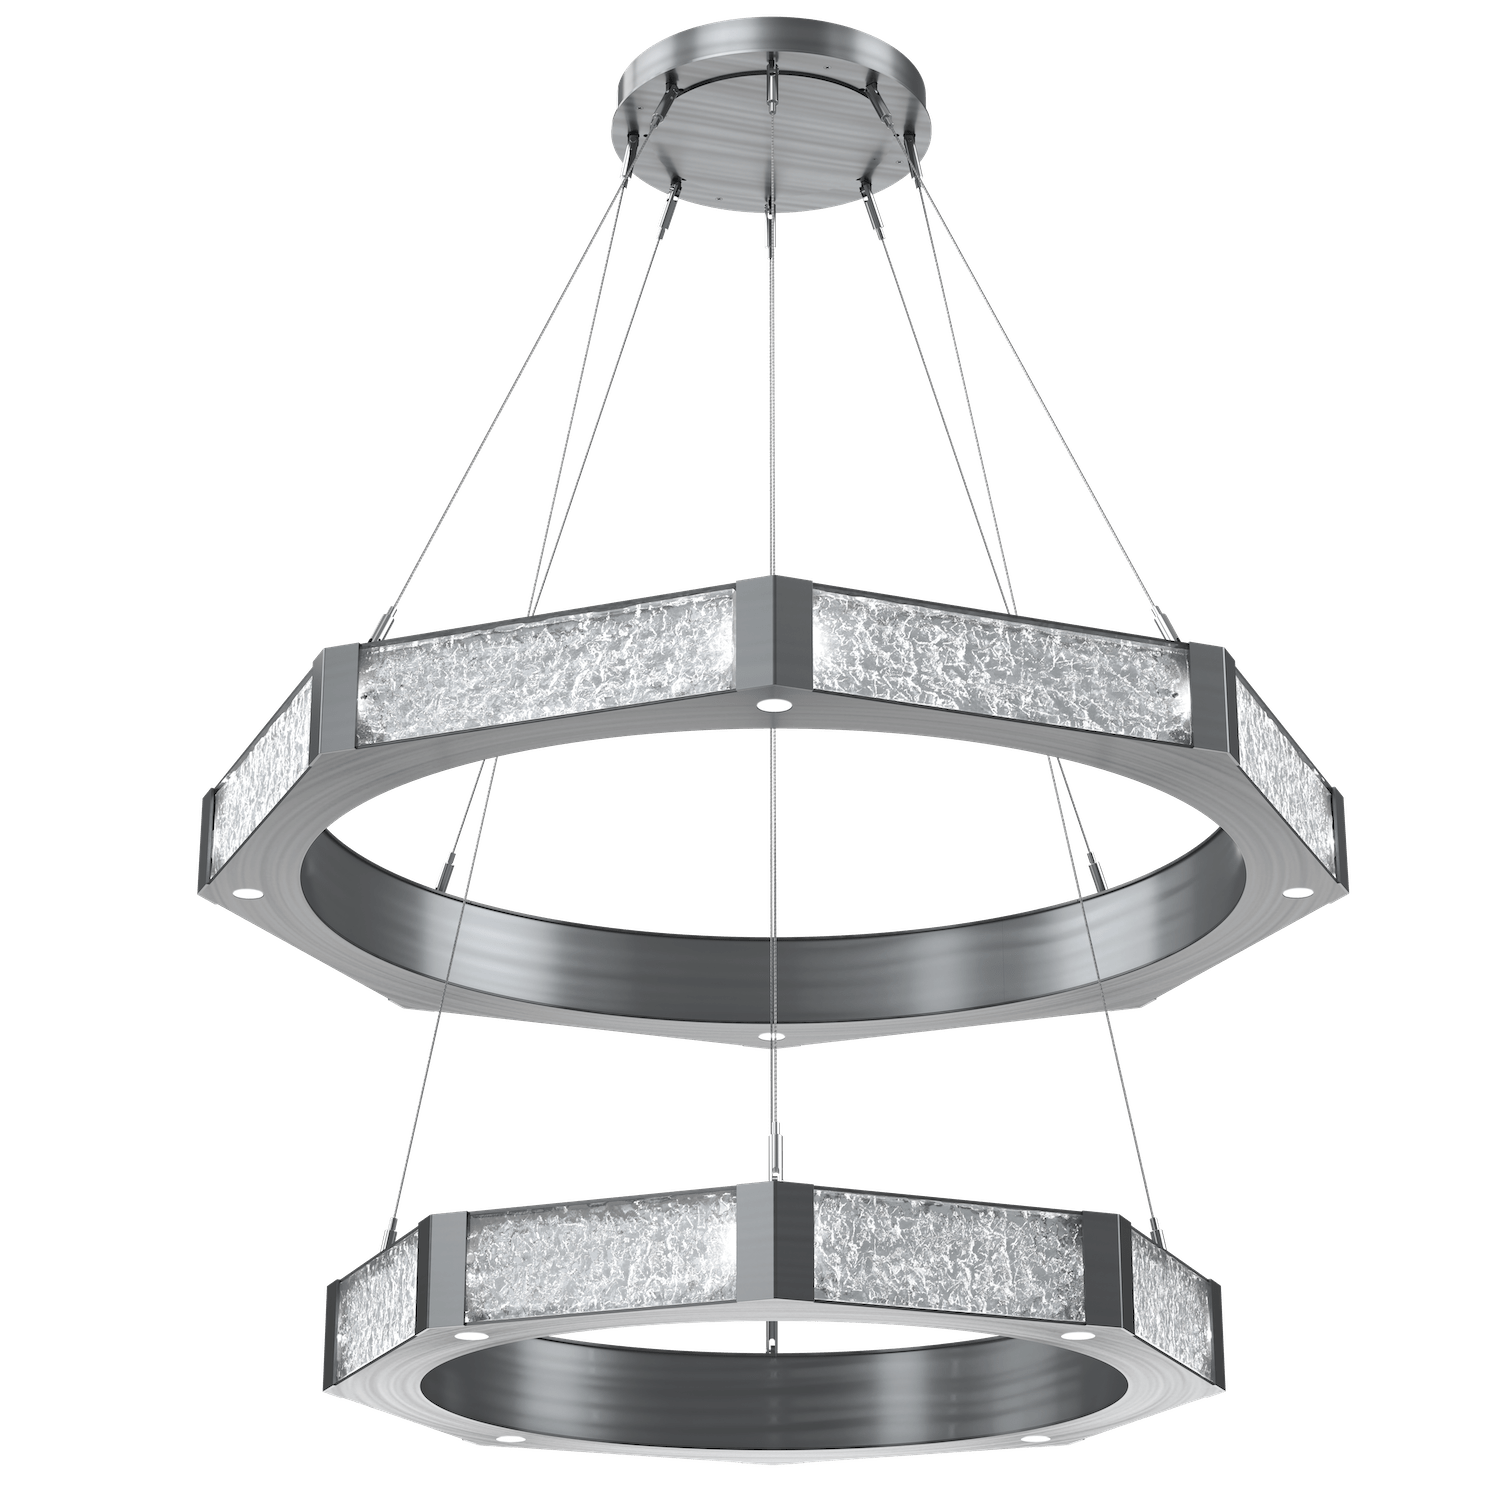 CHB0061-2B-GM-GC-Hammerton-Studio-Glacier-48-inch-two-tier-ring-chandelier-with-gunmetal-finish-and-clear-blown-glass-with-geo-clear-cast-glass-diffusers-and-LED-lamping